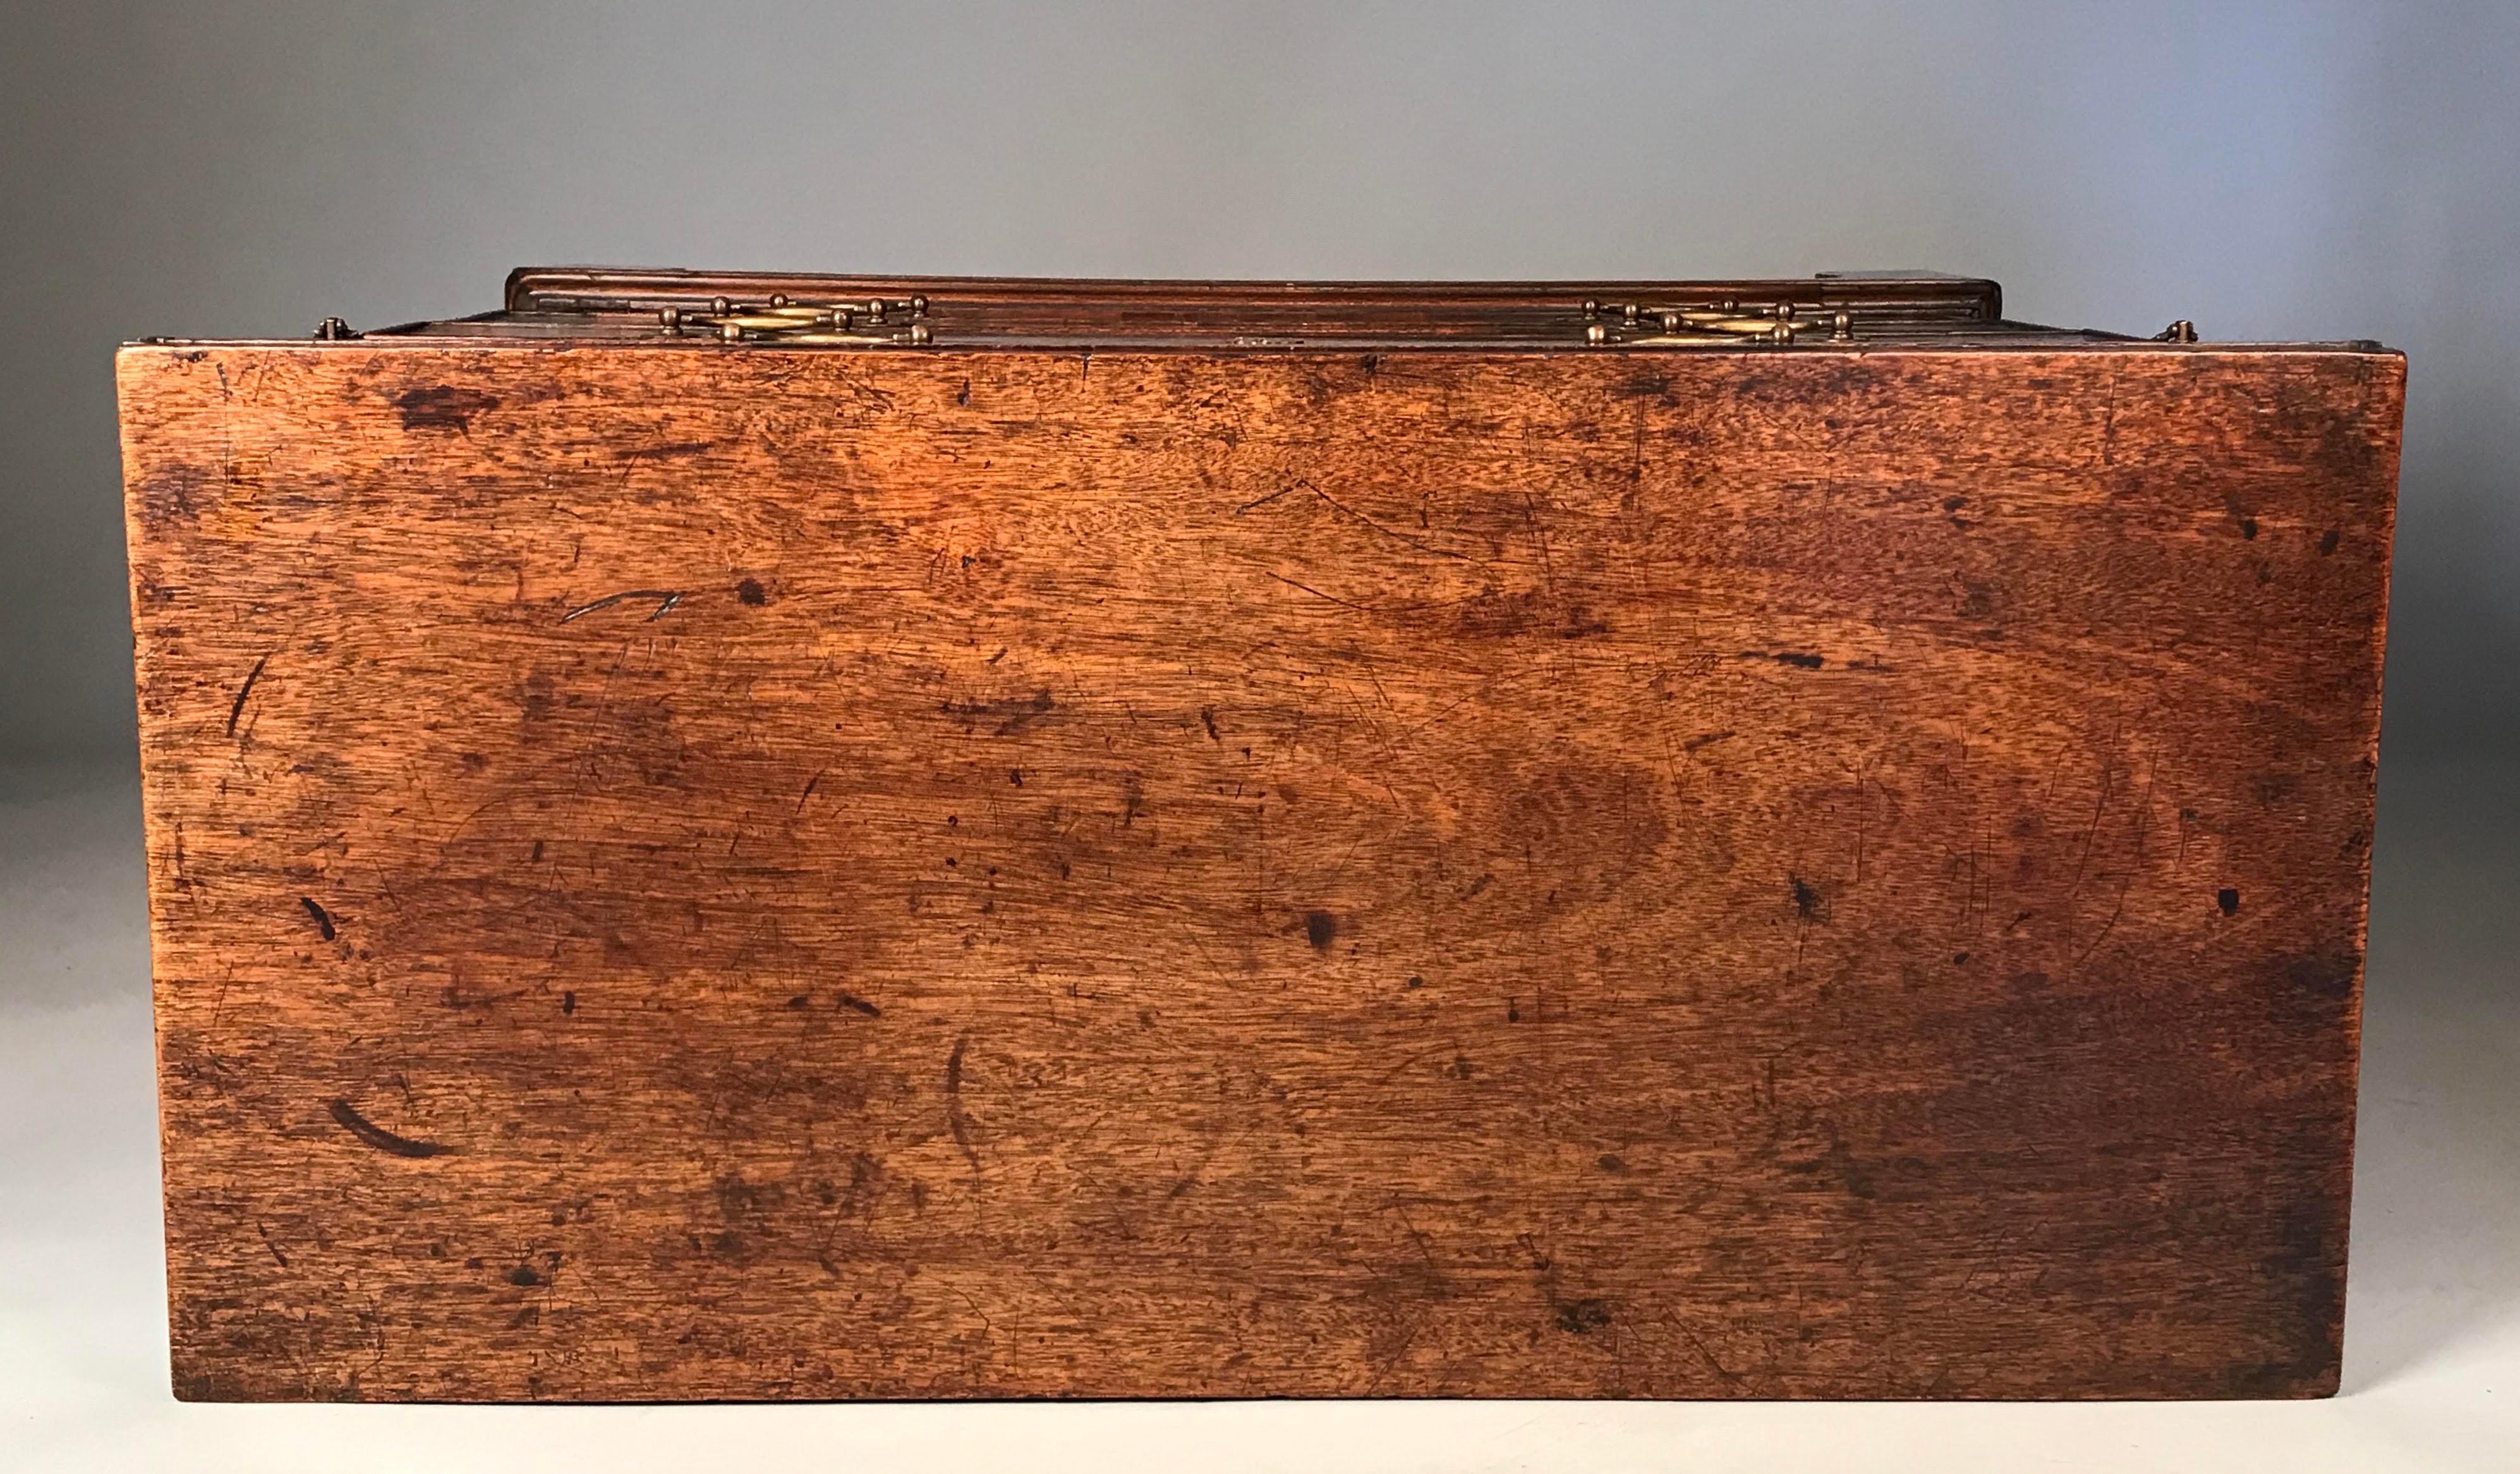 Antique English red walnut fold-over top bachelor's chest. George II period, circa 1750.
This small size Georgian (mid-18th century) bachelor's chest is in solid walnut. 
Very good color and old patination.

The hinged fold-over top has the unusual